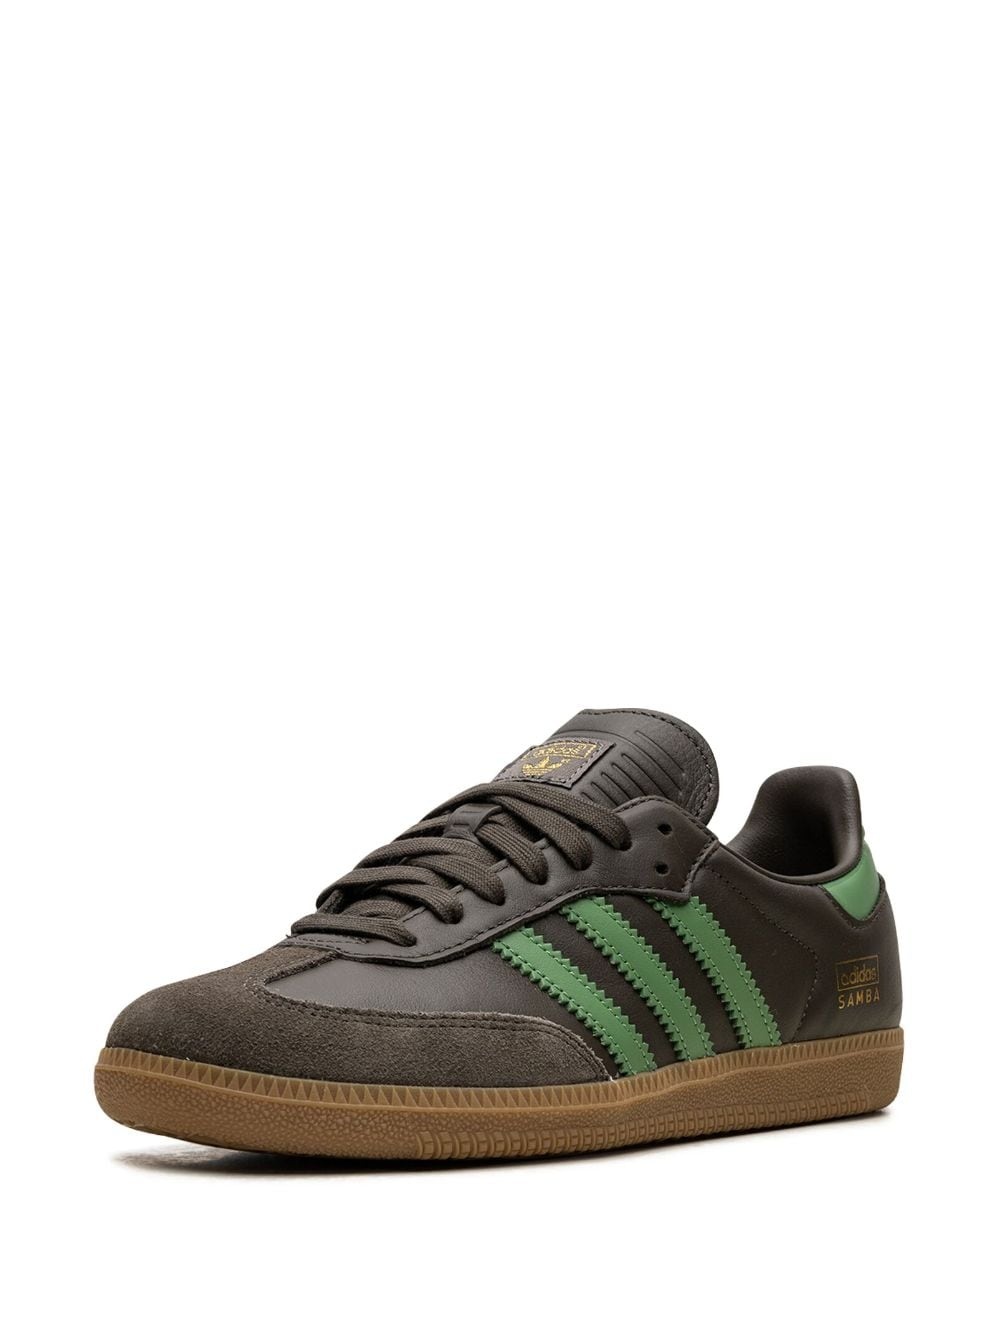 5 "Green and Brown" sneakers - 4